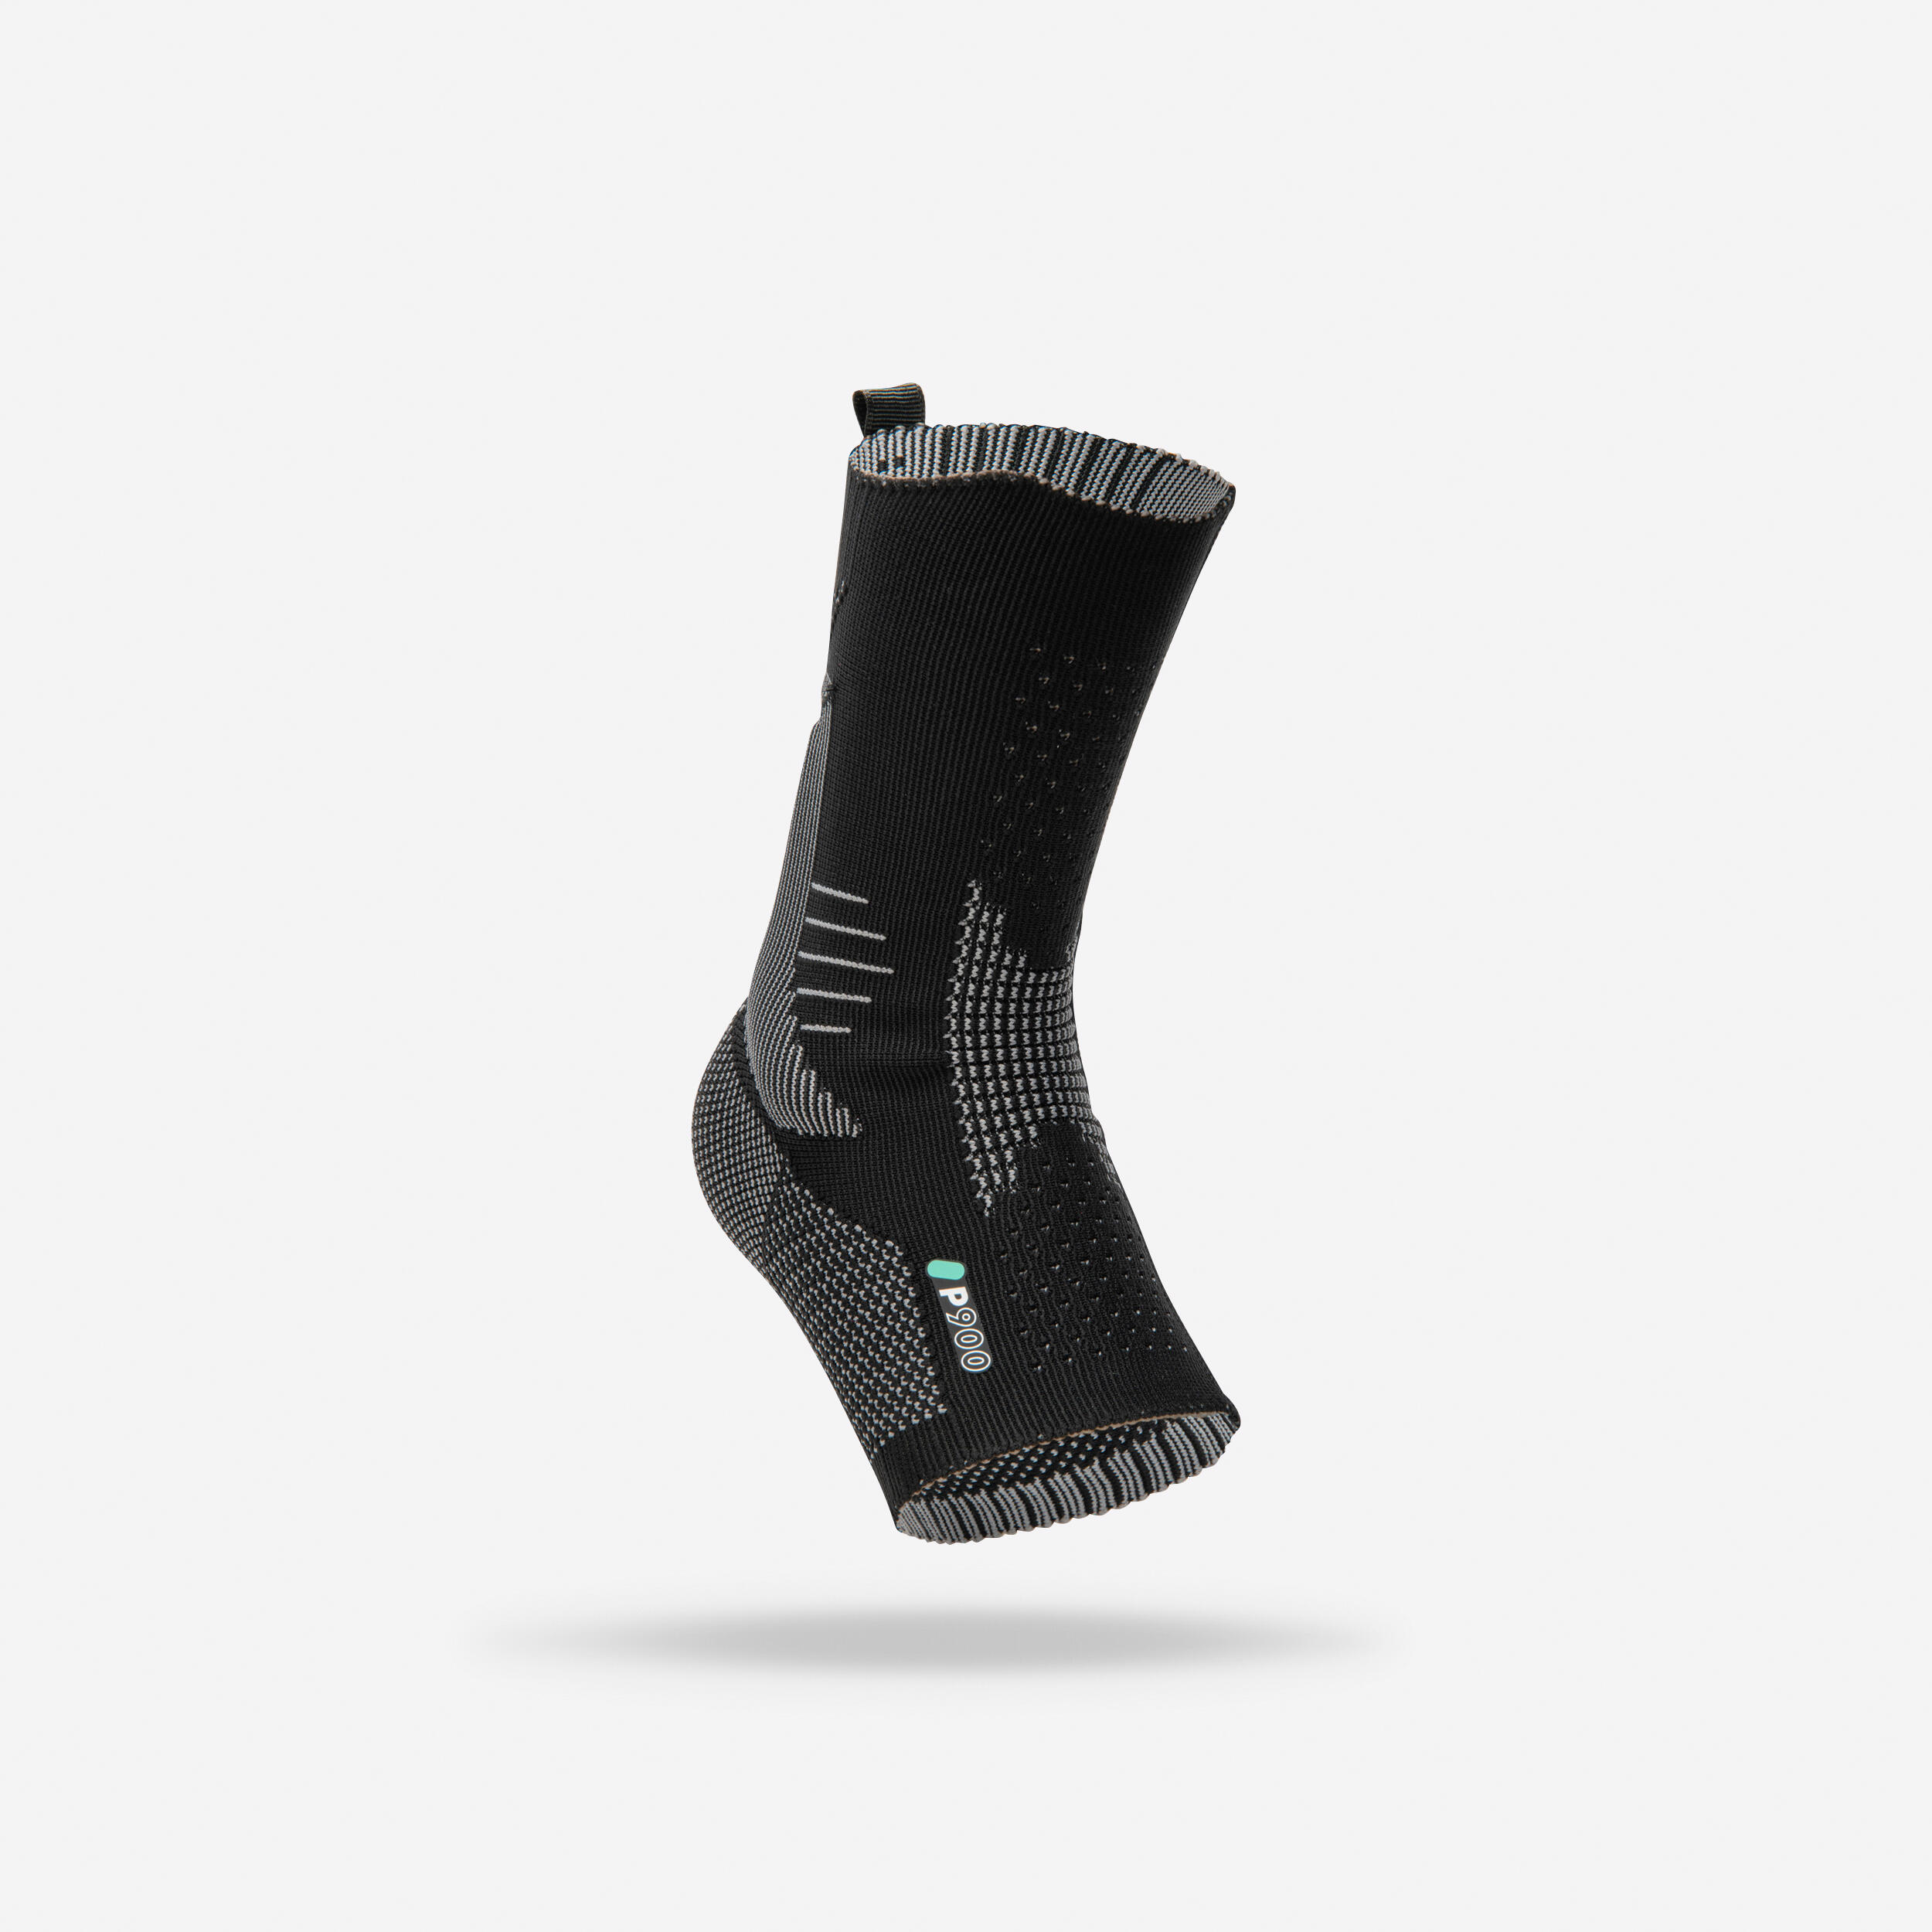 Adult Ankle Support P900 - Black 1/6